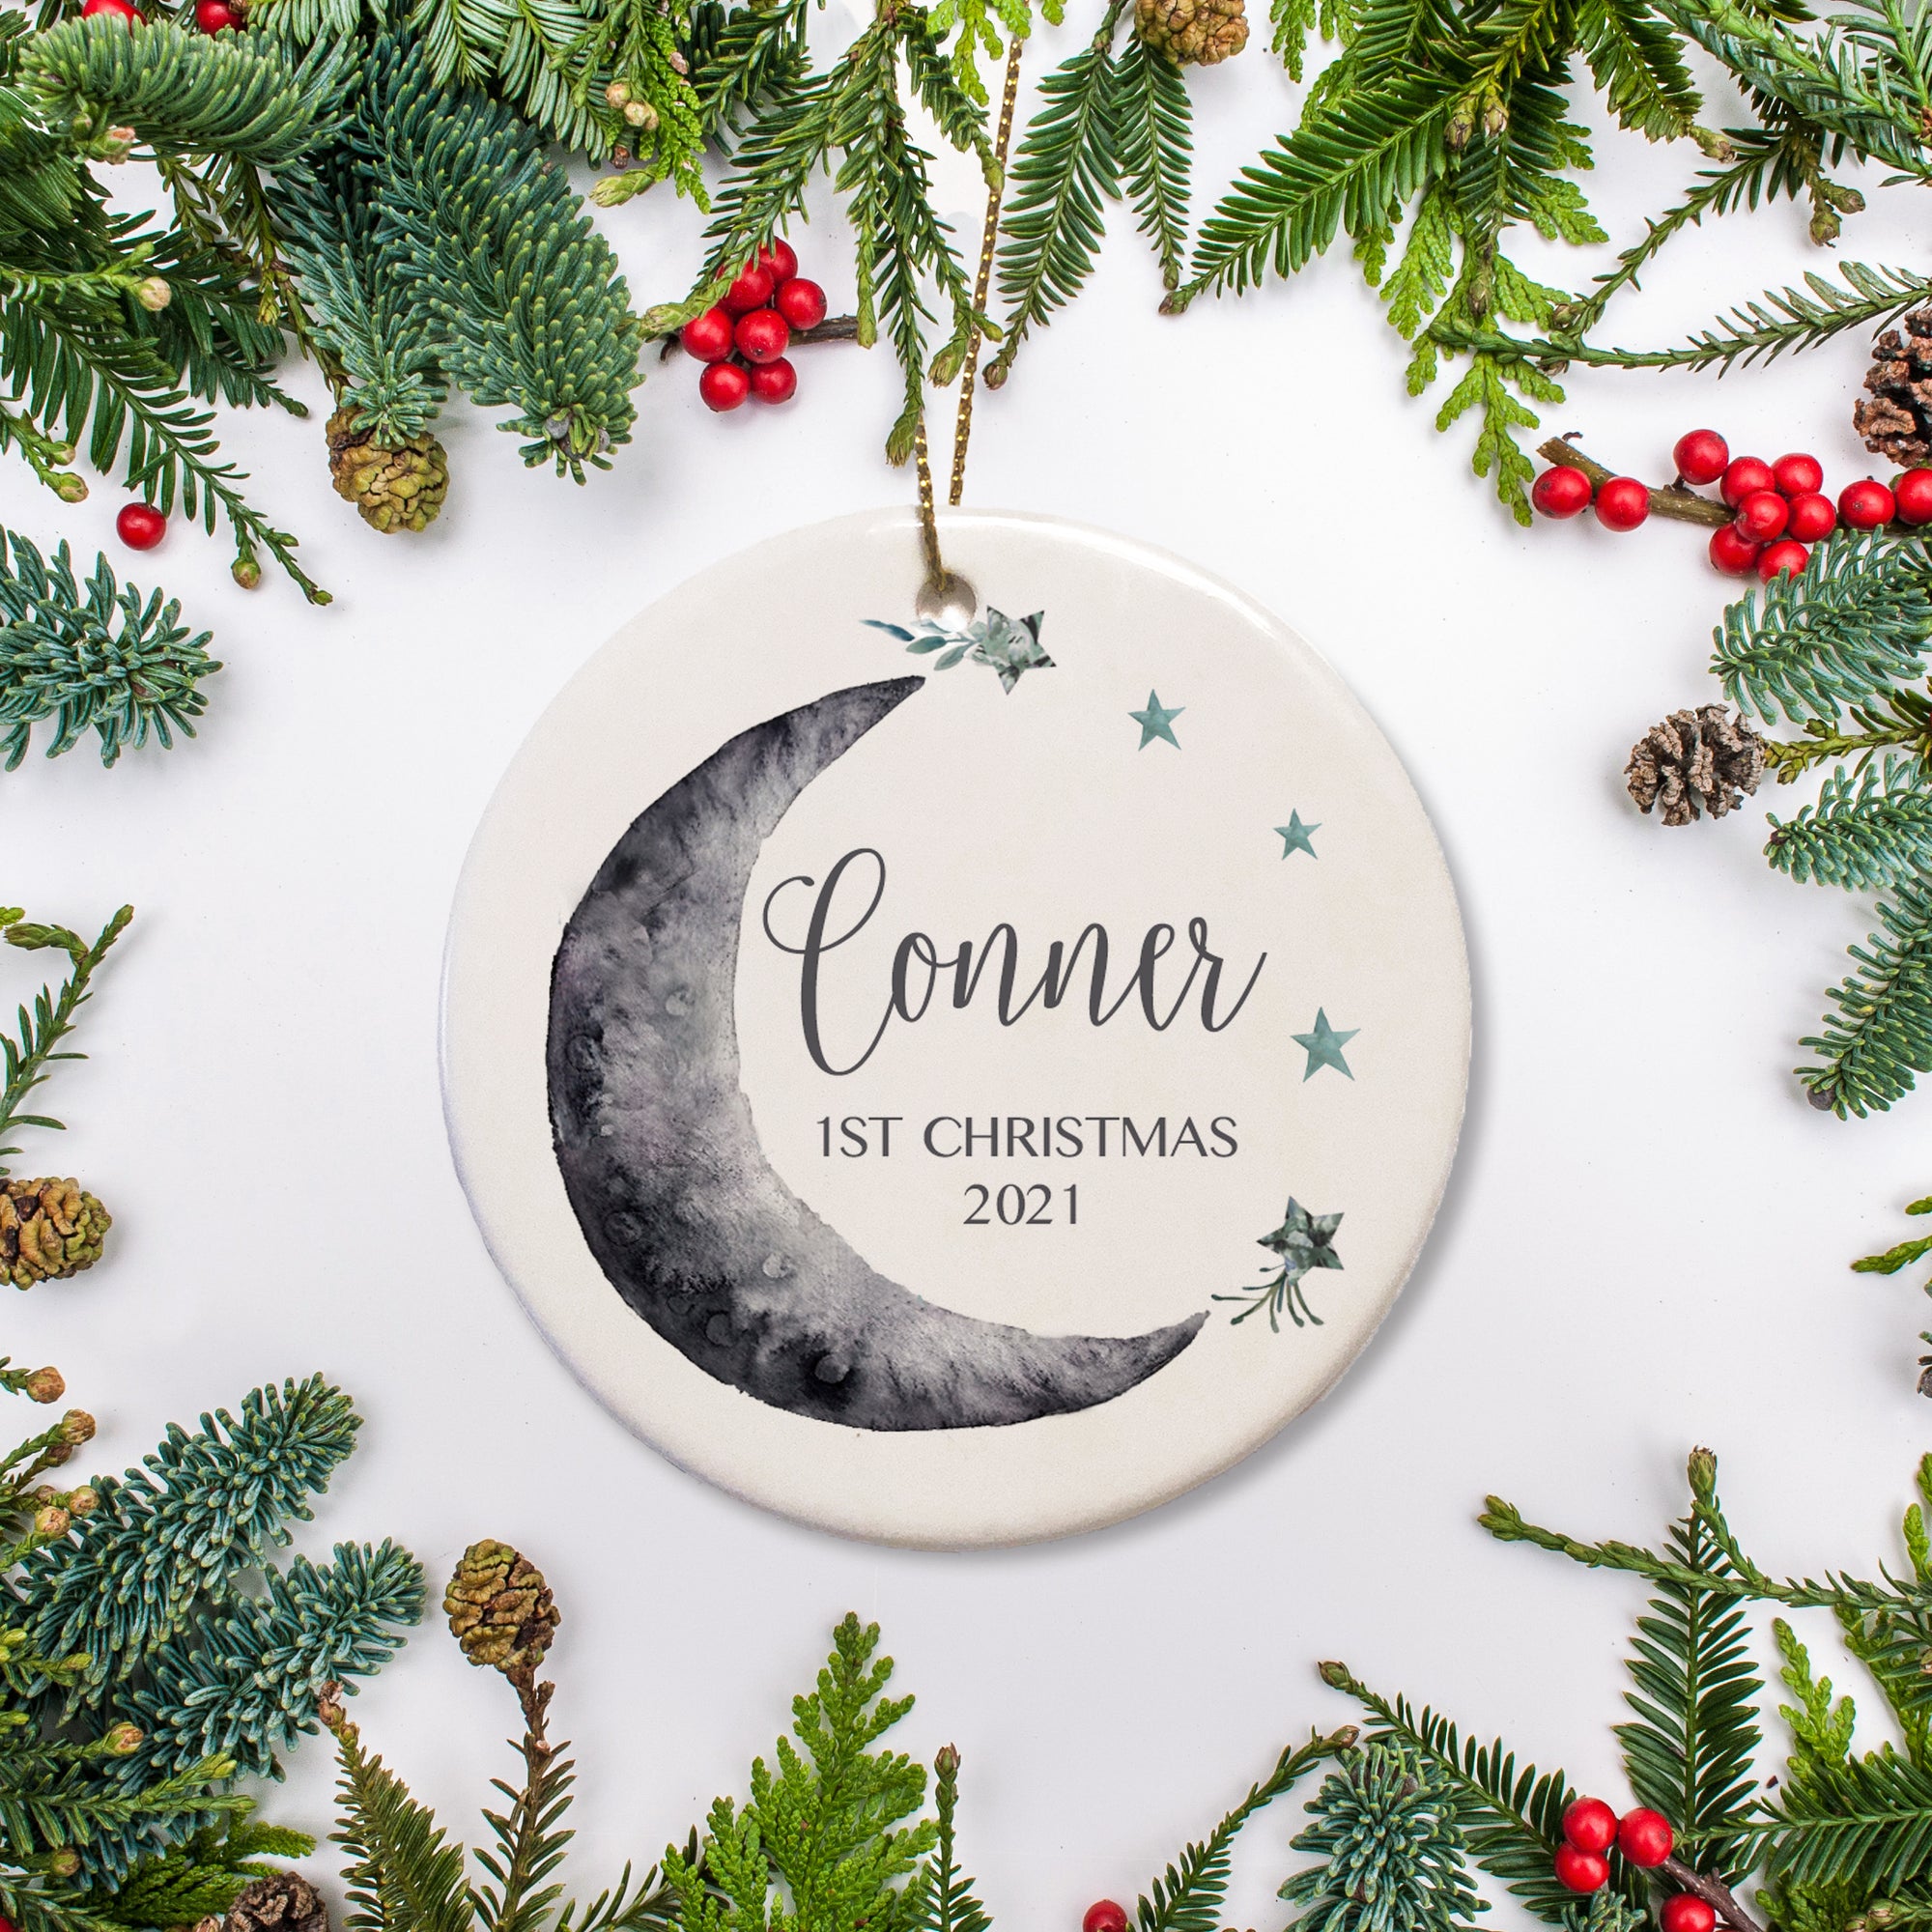 Moon and Stars personalized Christmas Ornament - Name along with 1st Christmas nestled in the moon | Pipsy.com